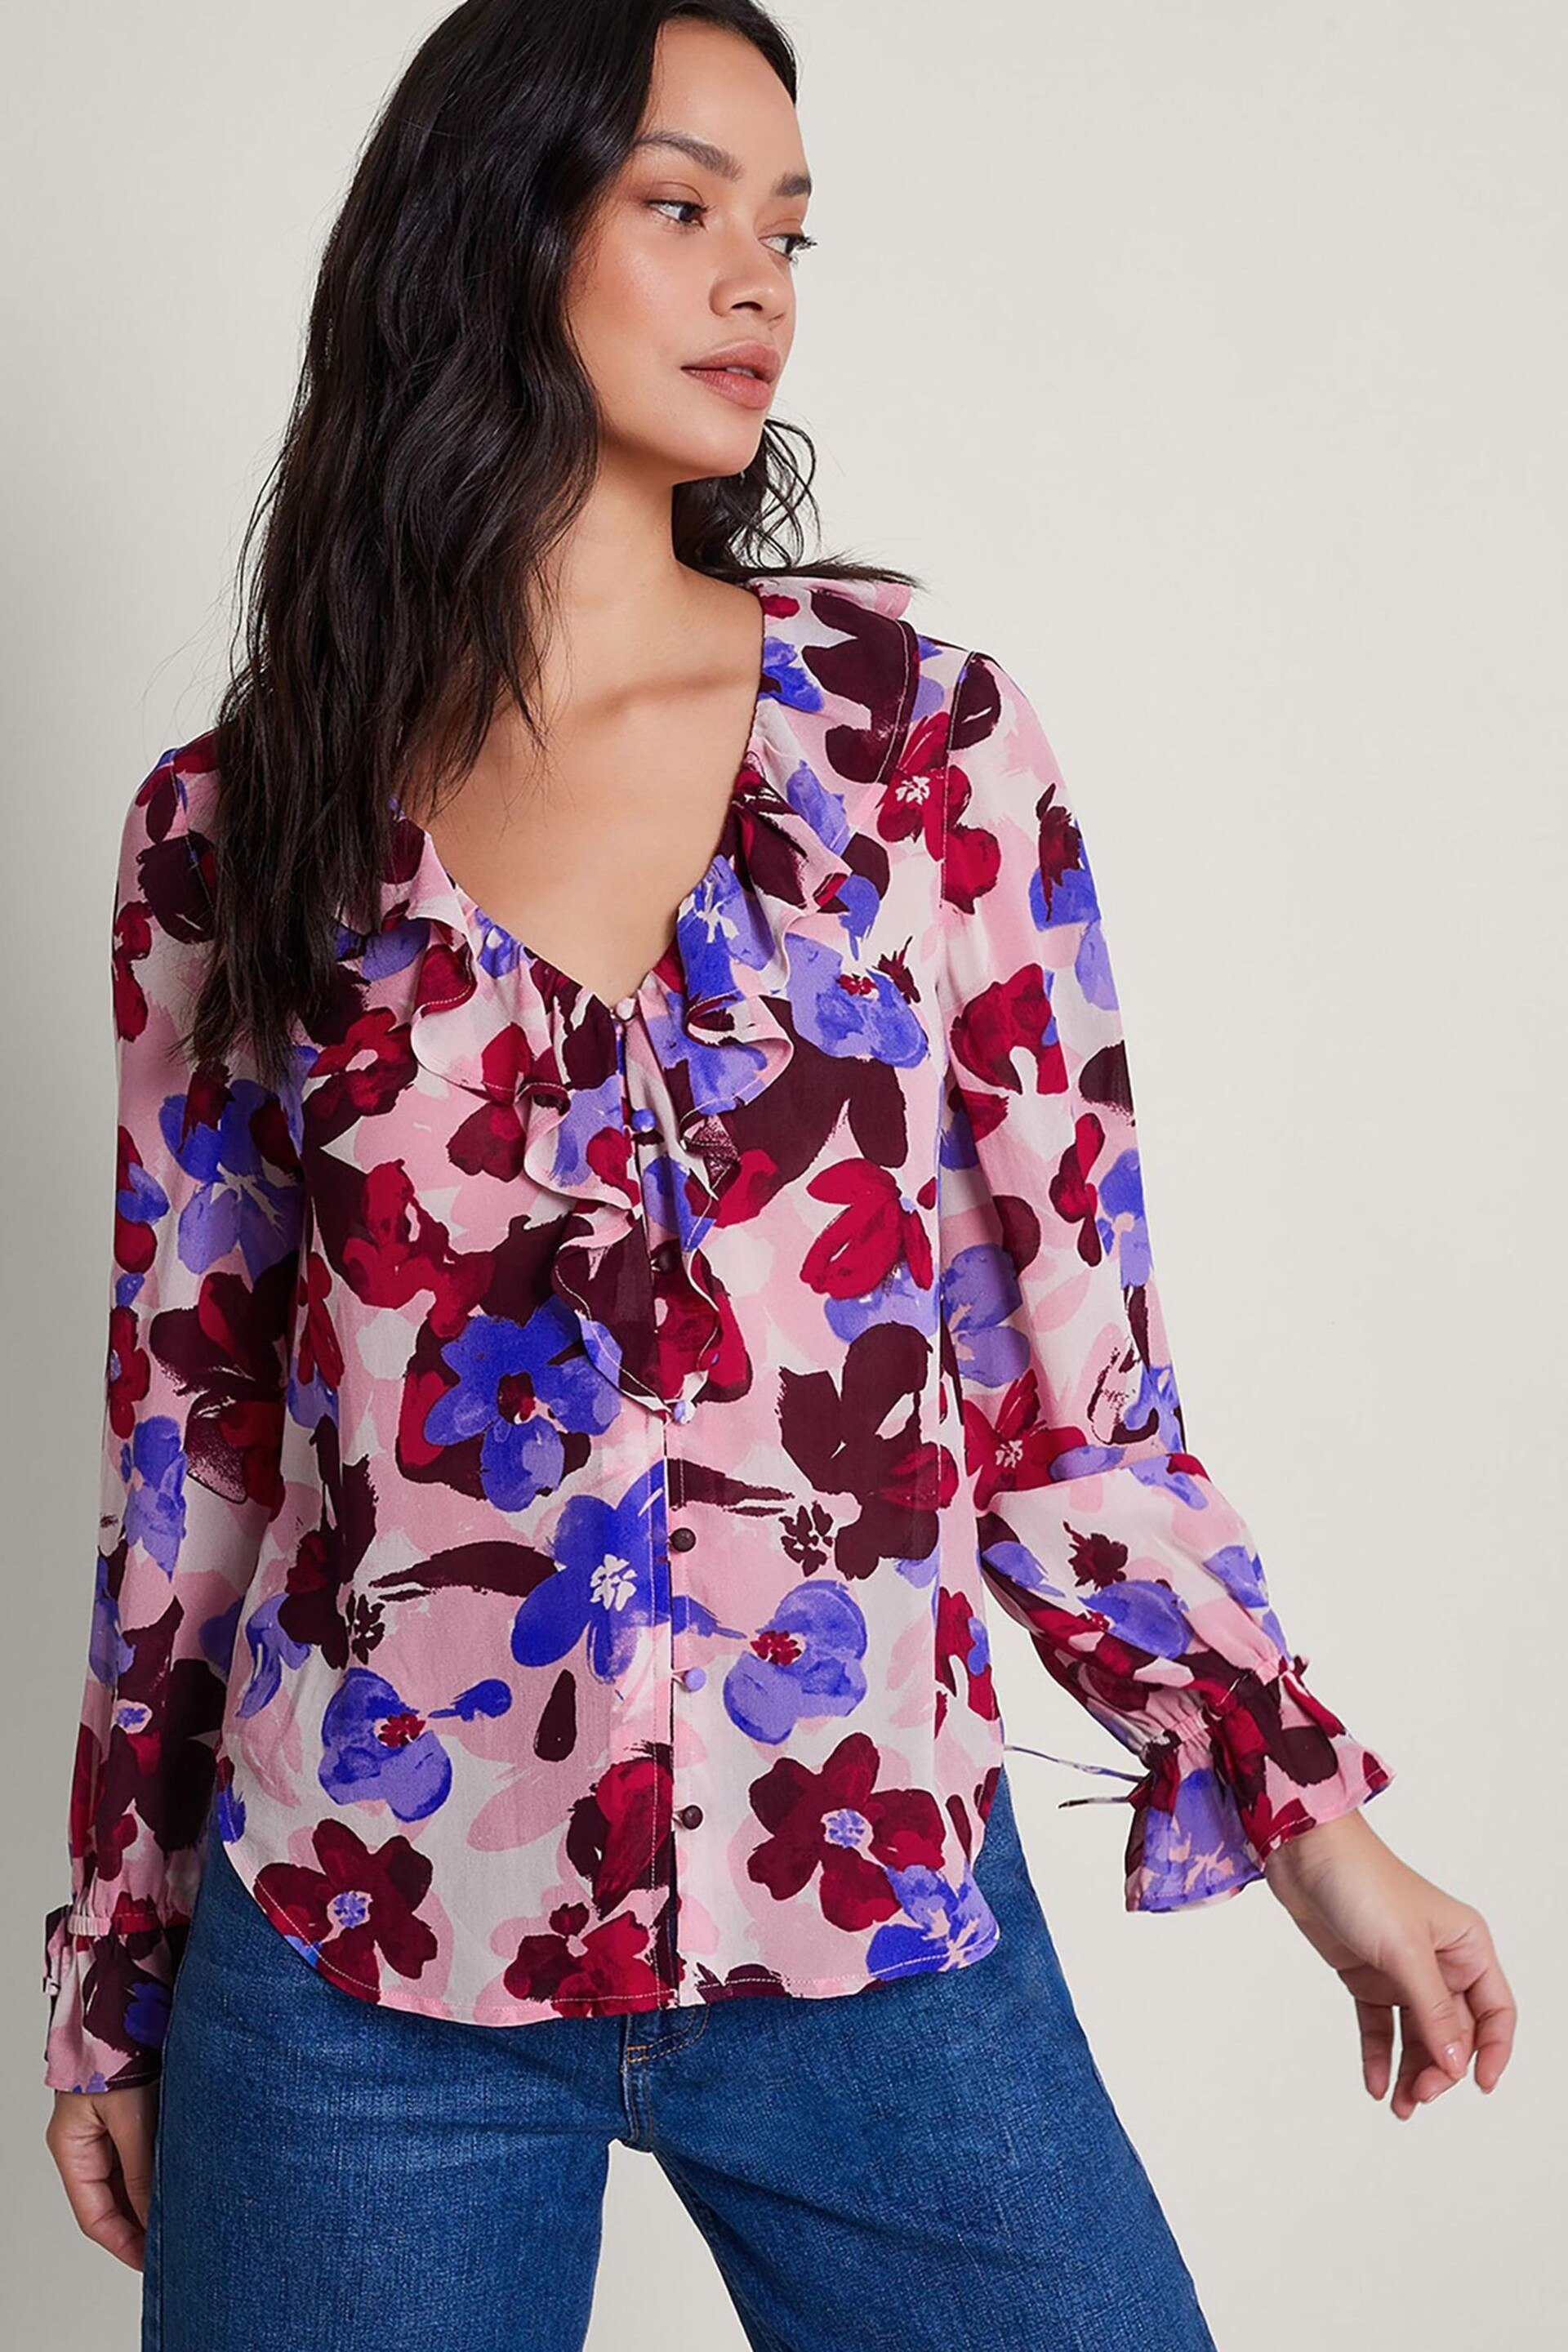 Monsoon Vittoria Floral Print Blouse - Image 1 of 5